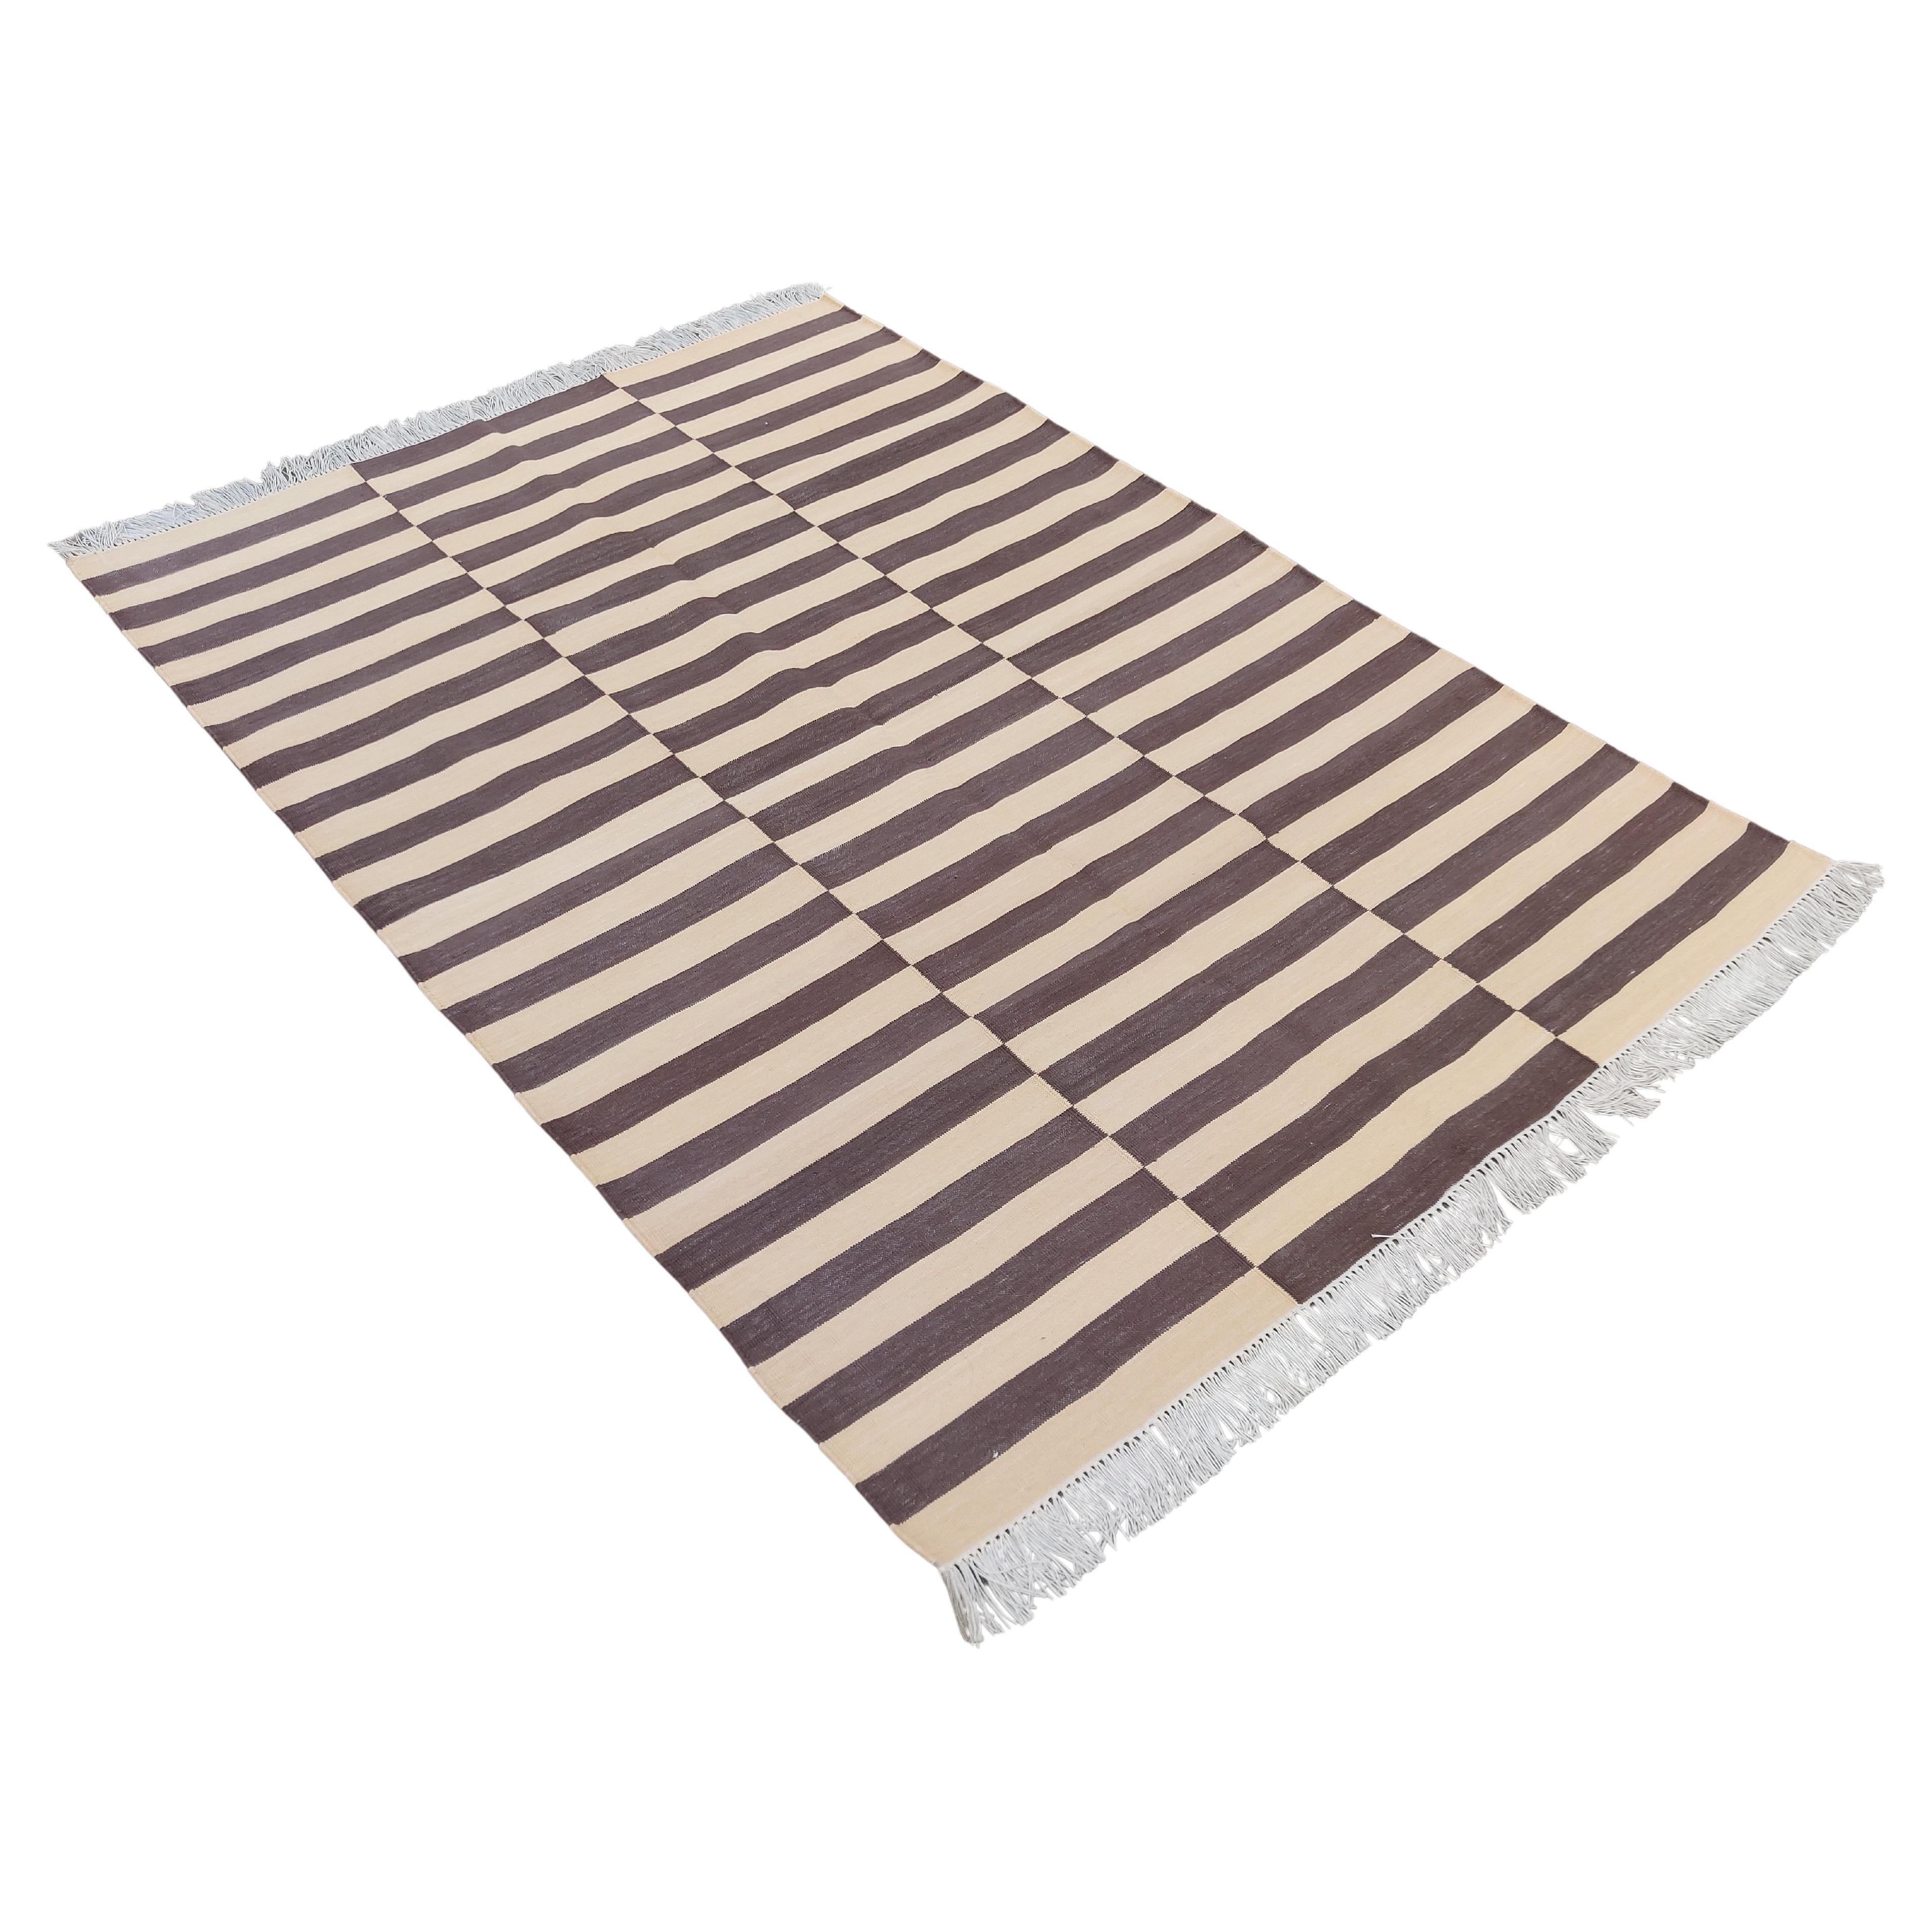 Handmade Cotton Area Flat Weave Rug, 4x6 Brown And Cream Striped Indian Dhurrie